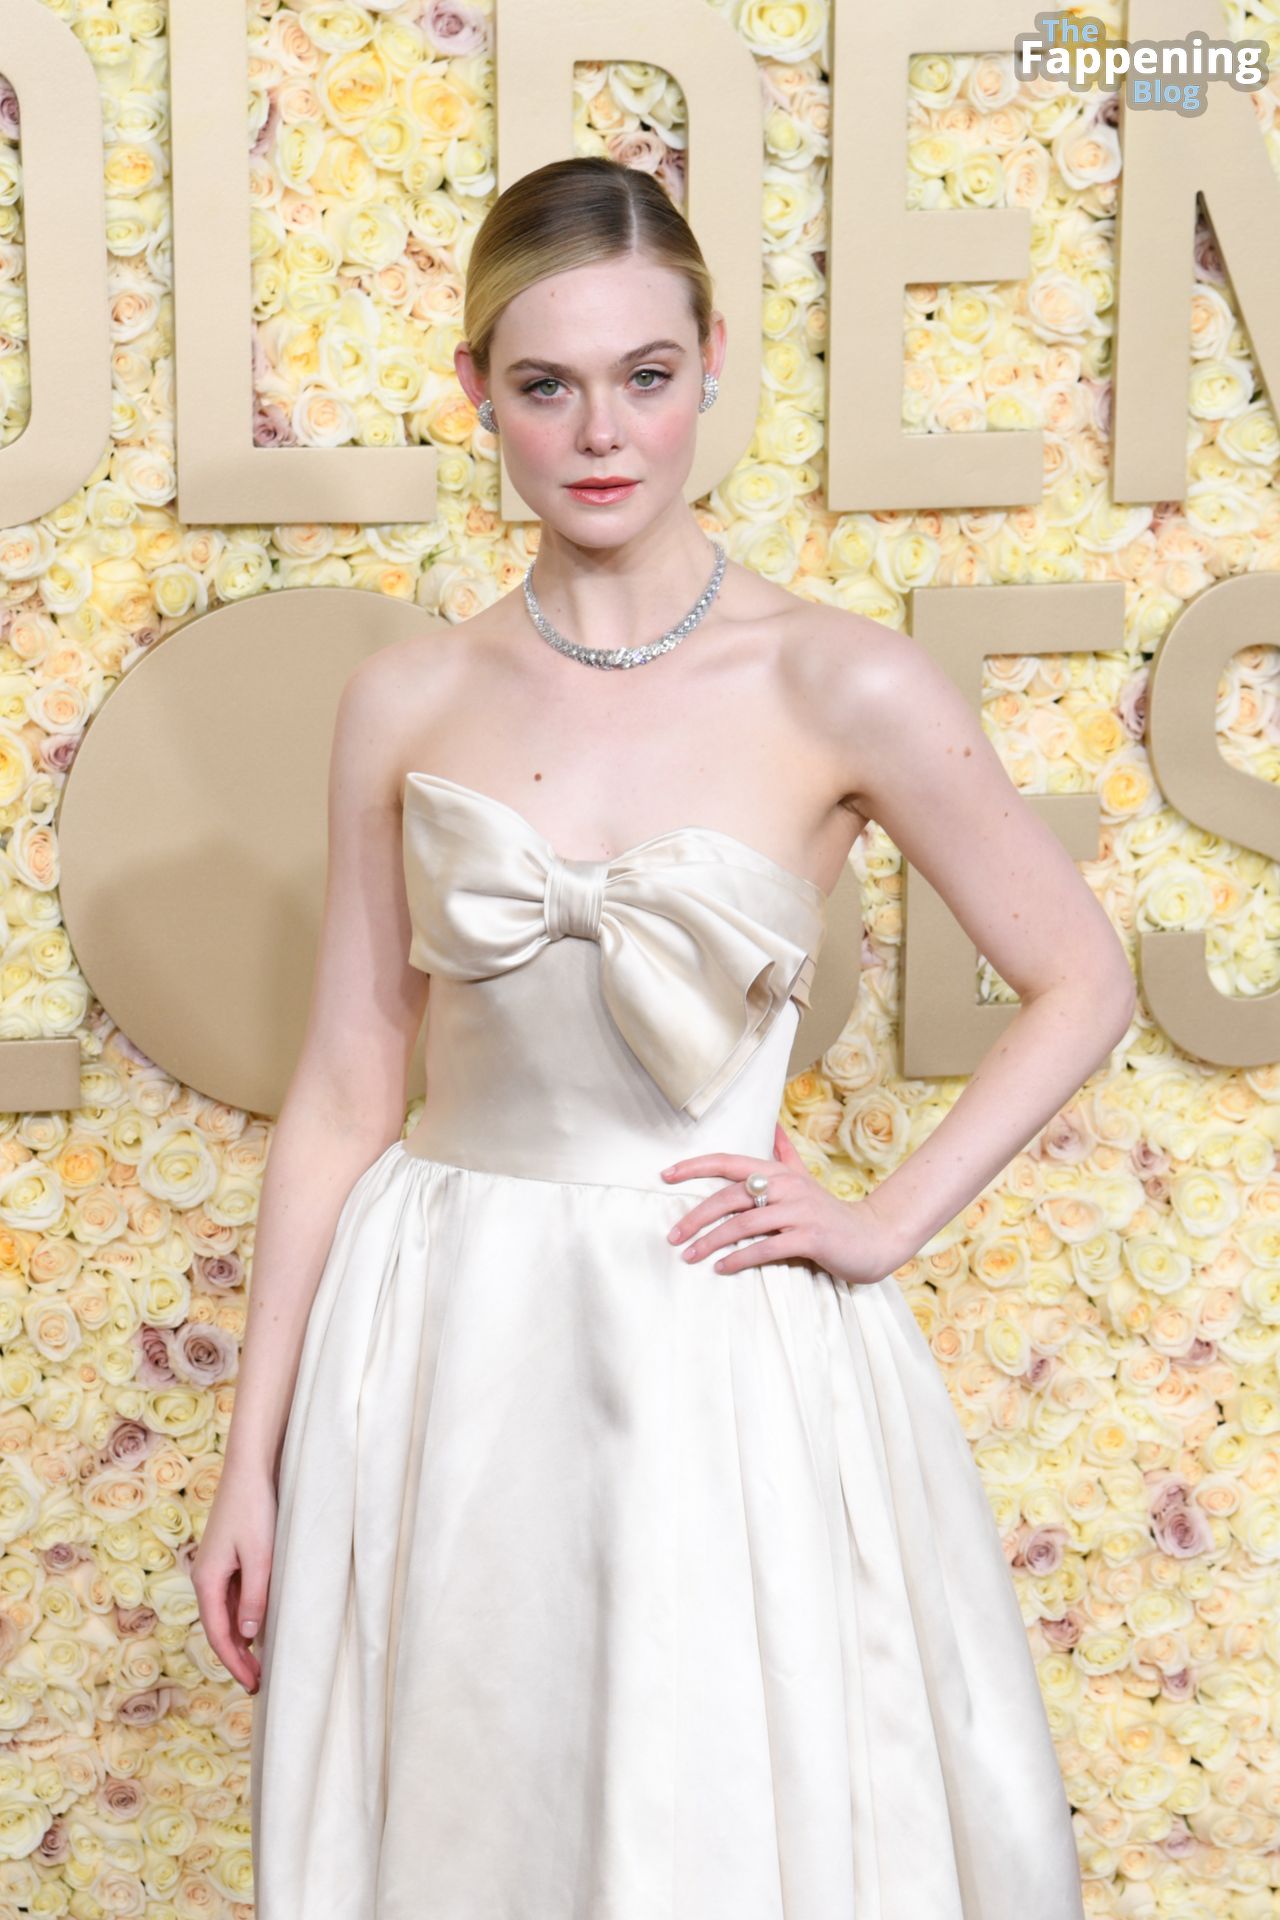 Elle-Fanning-Sexy-3-The-Fappening-Blog.jpg